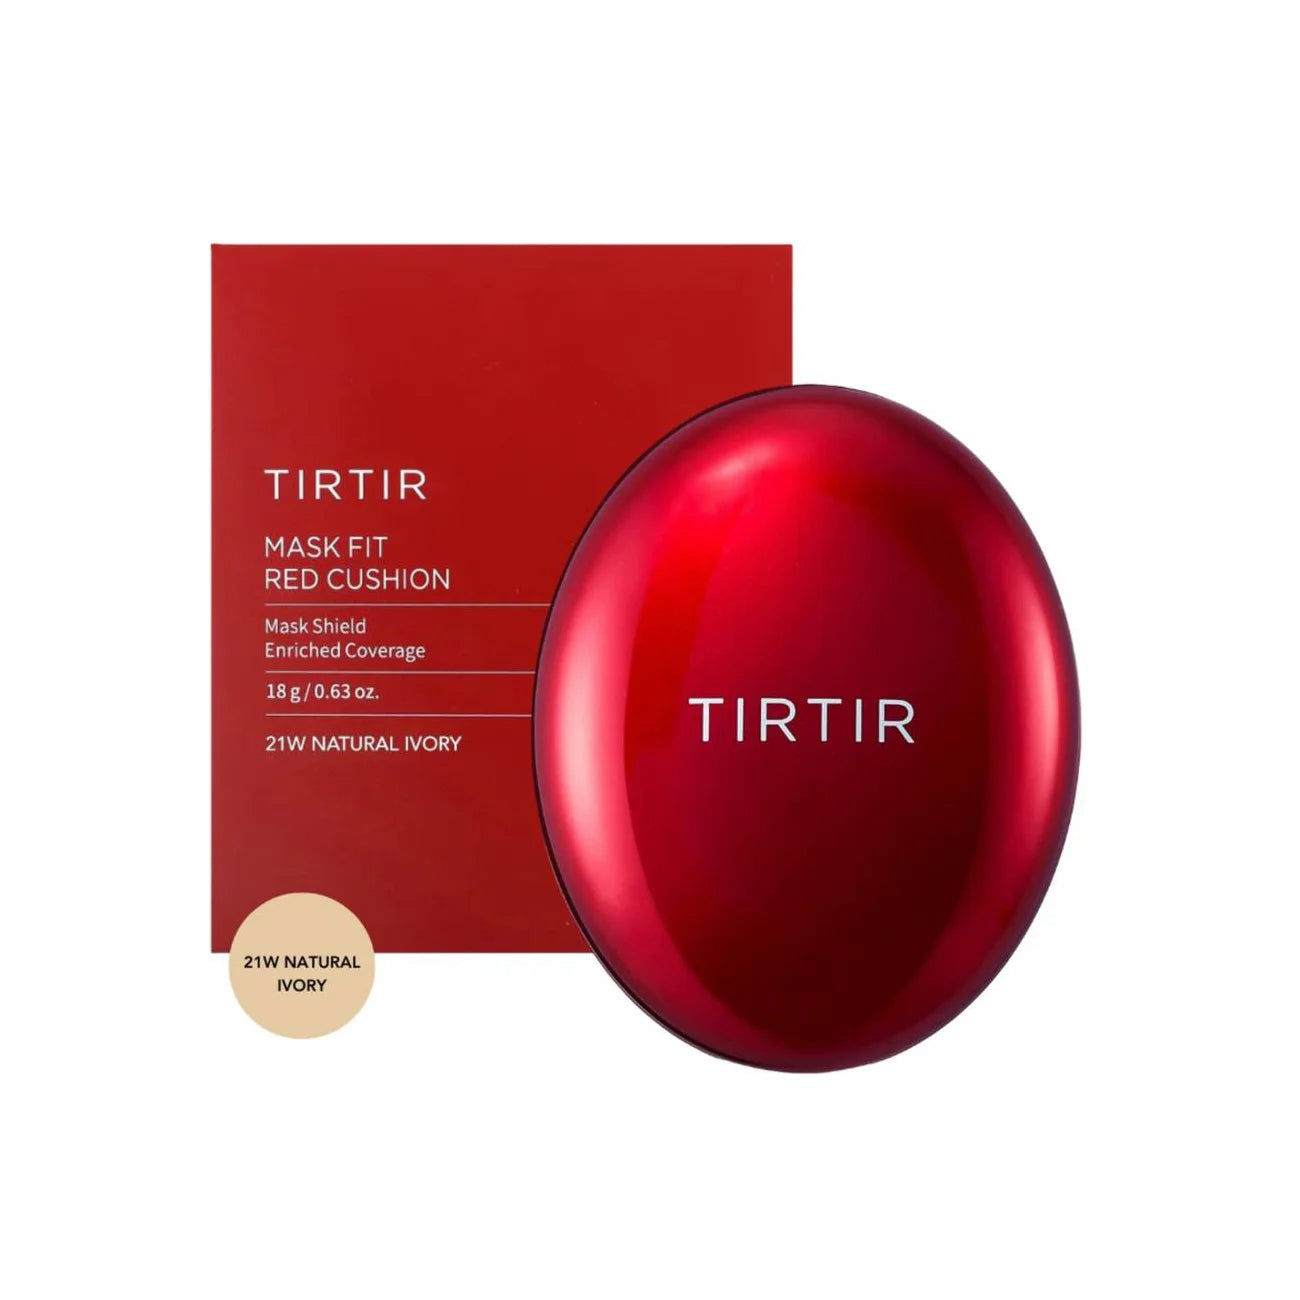 TIRTIR Mask Fit Red Cushion 21W Natural Ivory best Korean makeup foundation full coverage semi matte hydrating non-drying K Beauty World